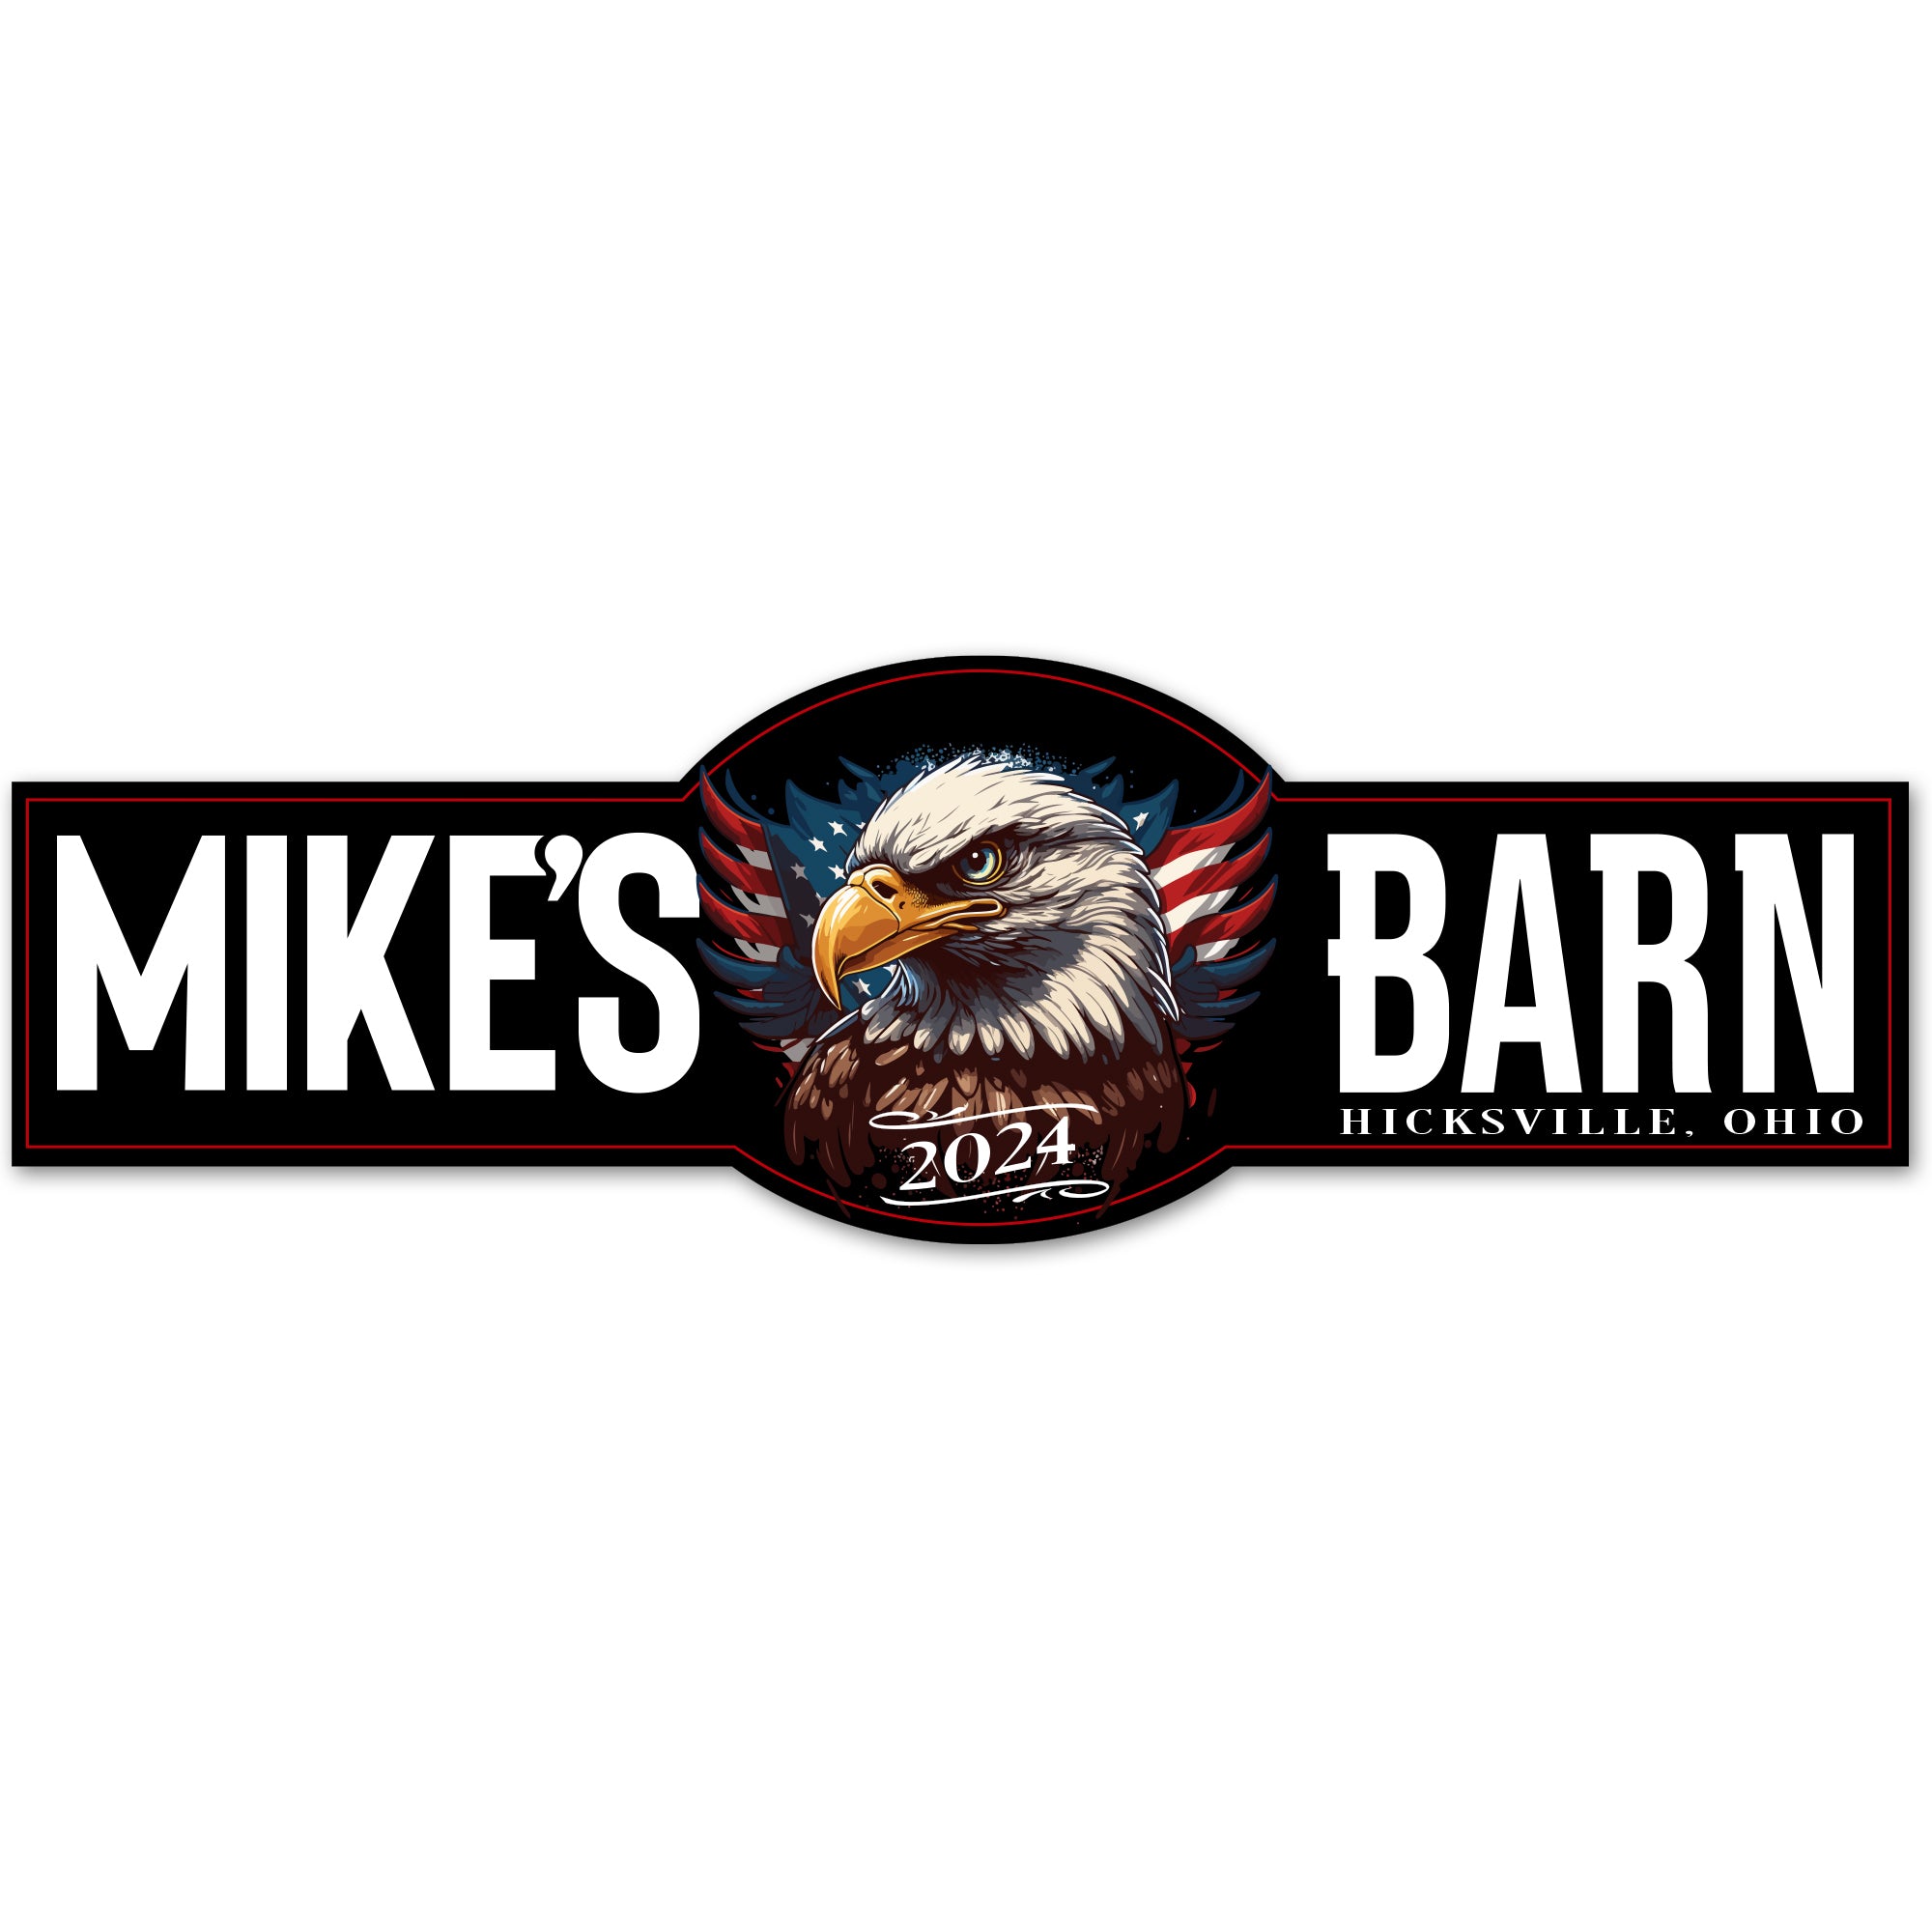 Patriotic Barn Signs with american flag and bald eagle with name, city and state.